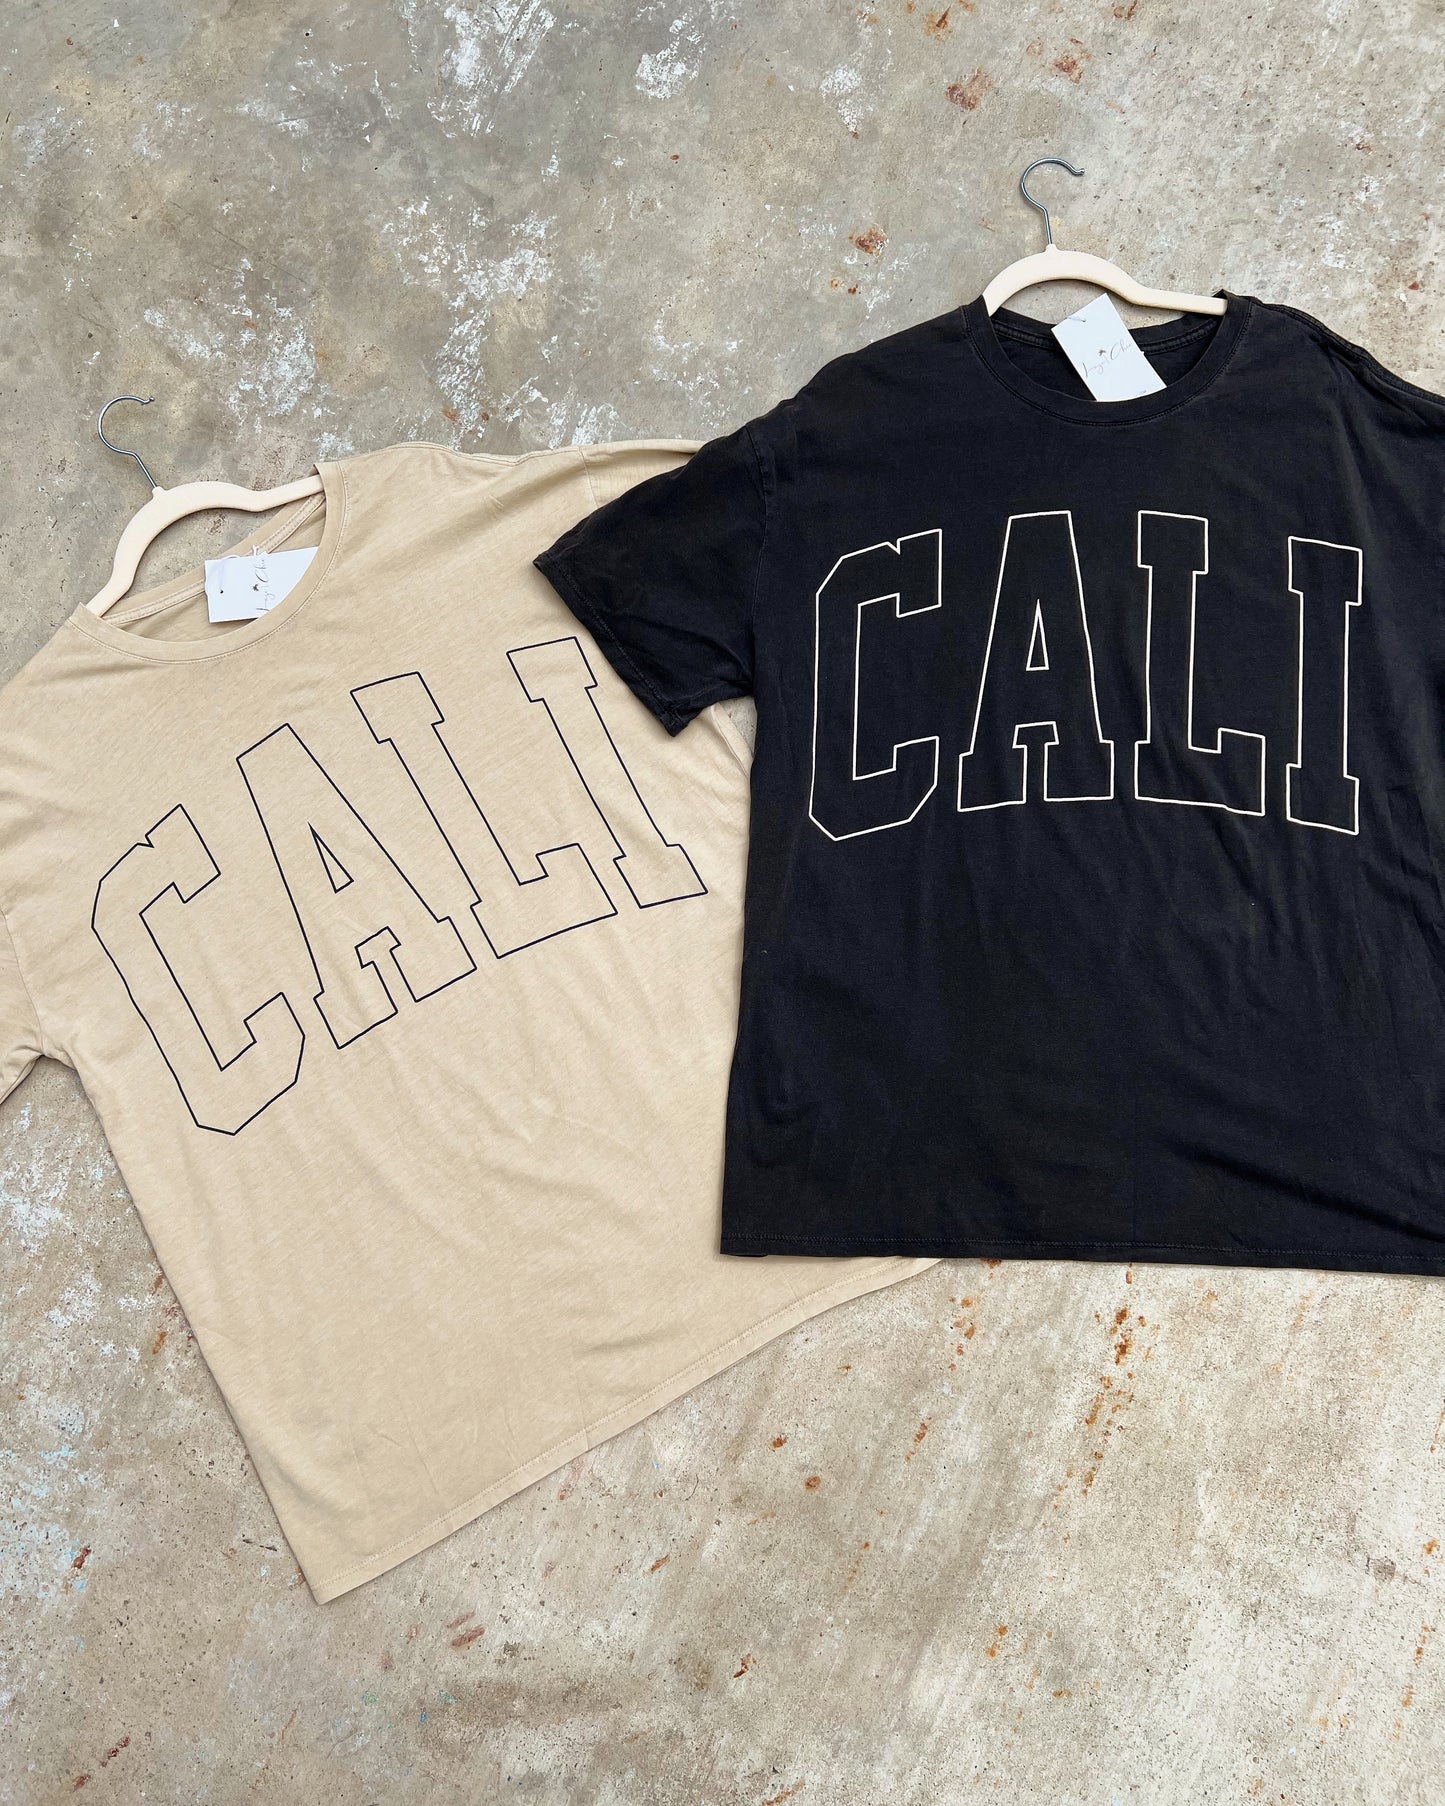 There's two oversized short sleeve t-shirts with CALI written on the front of shirt in large capital letters. There is a beige one and a charcoal one. They have a soft material and very lightweight. Can pair it with jeans or some comfortable biker shorts.